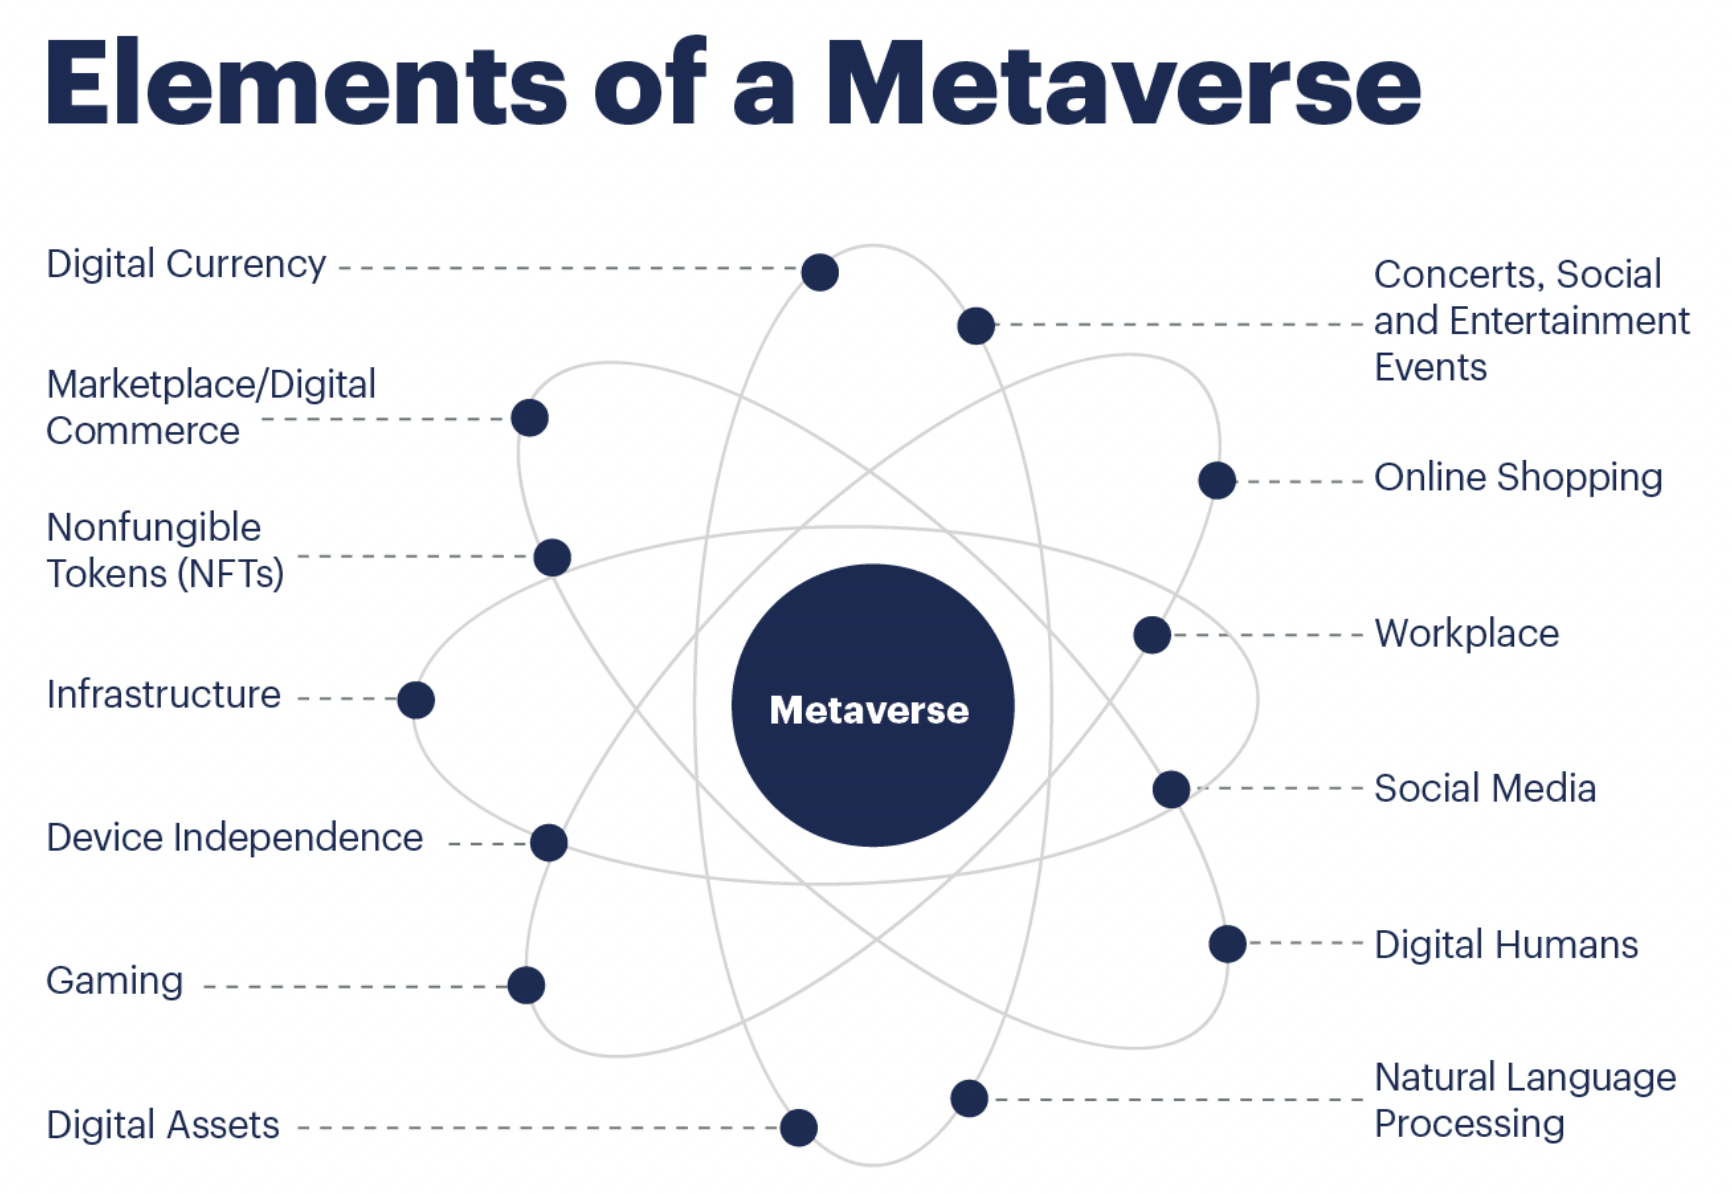 Elements of a metaverse